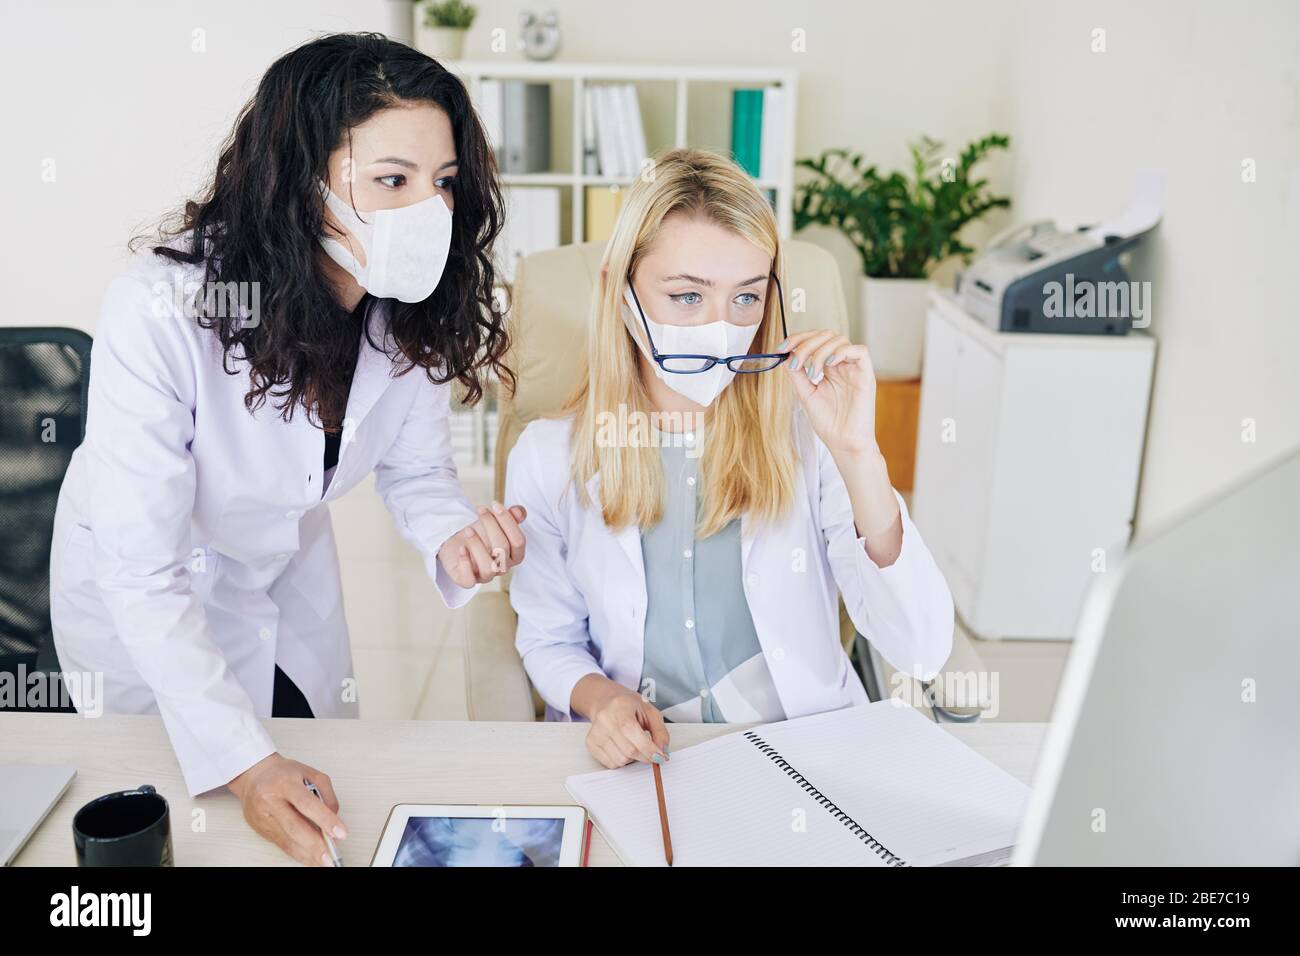 Young female medical workers in labcoats and medical masks analyzing chest x-ray on computer screen Stock Photo